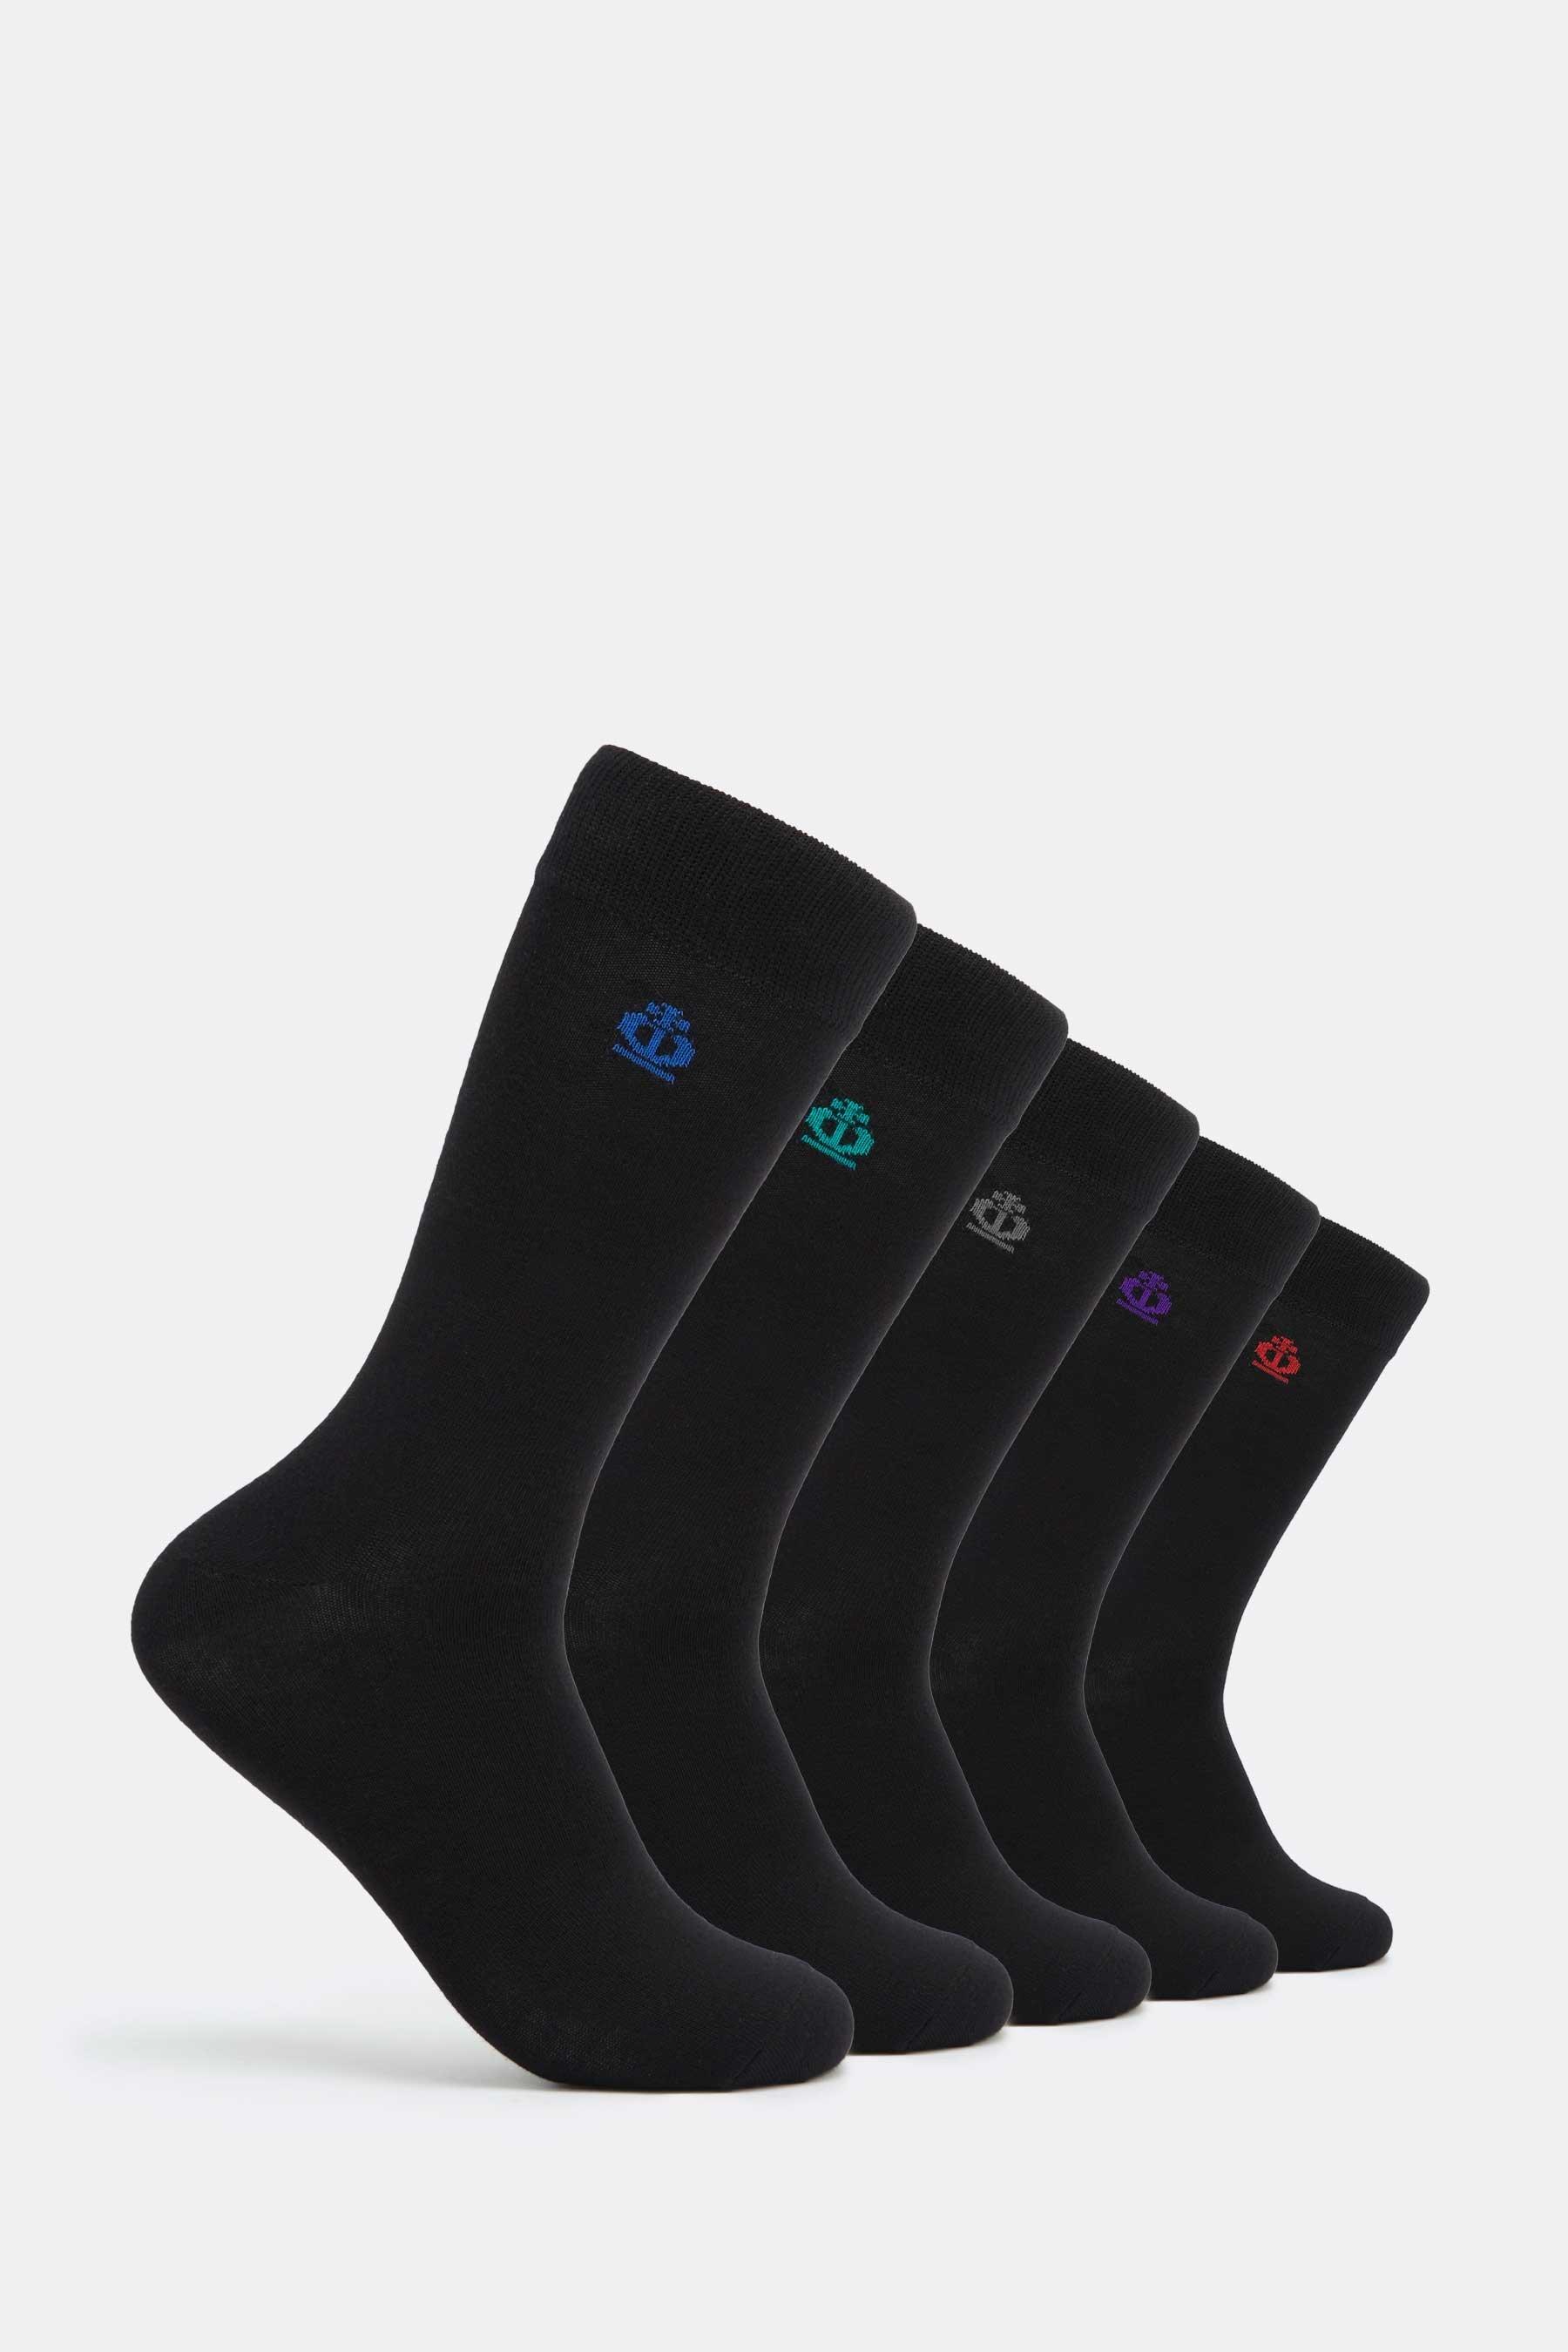 jeff banks pack of 5 embroidered bamboo socks - mens - black - size: 7-11